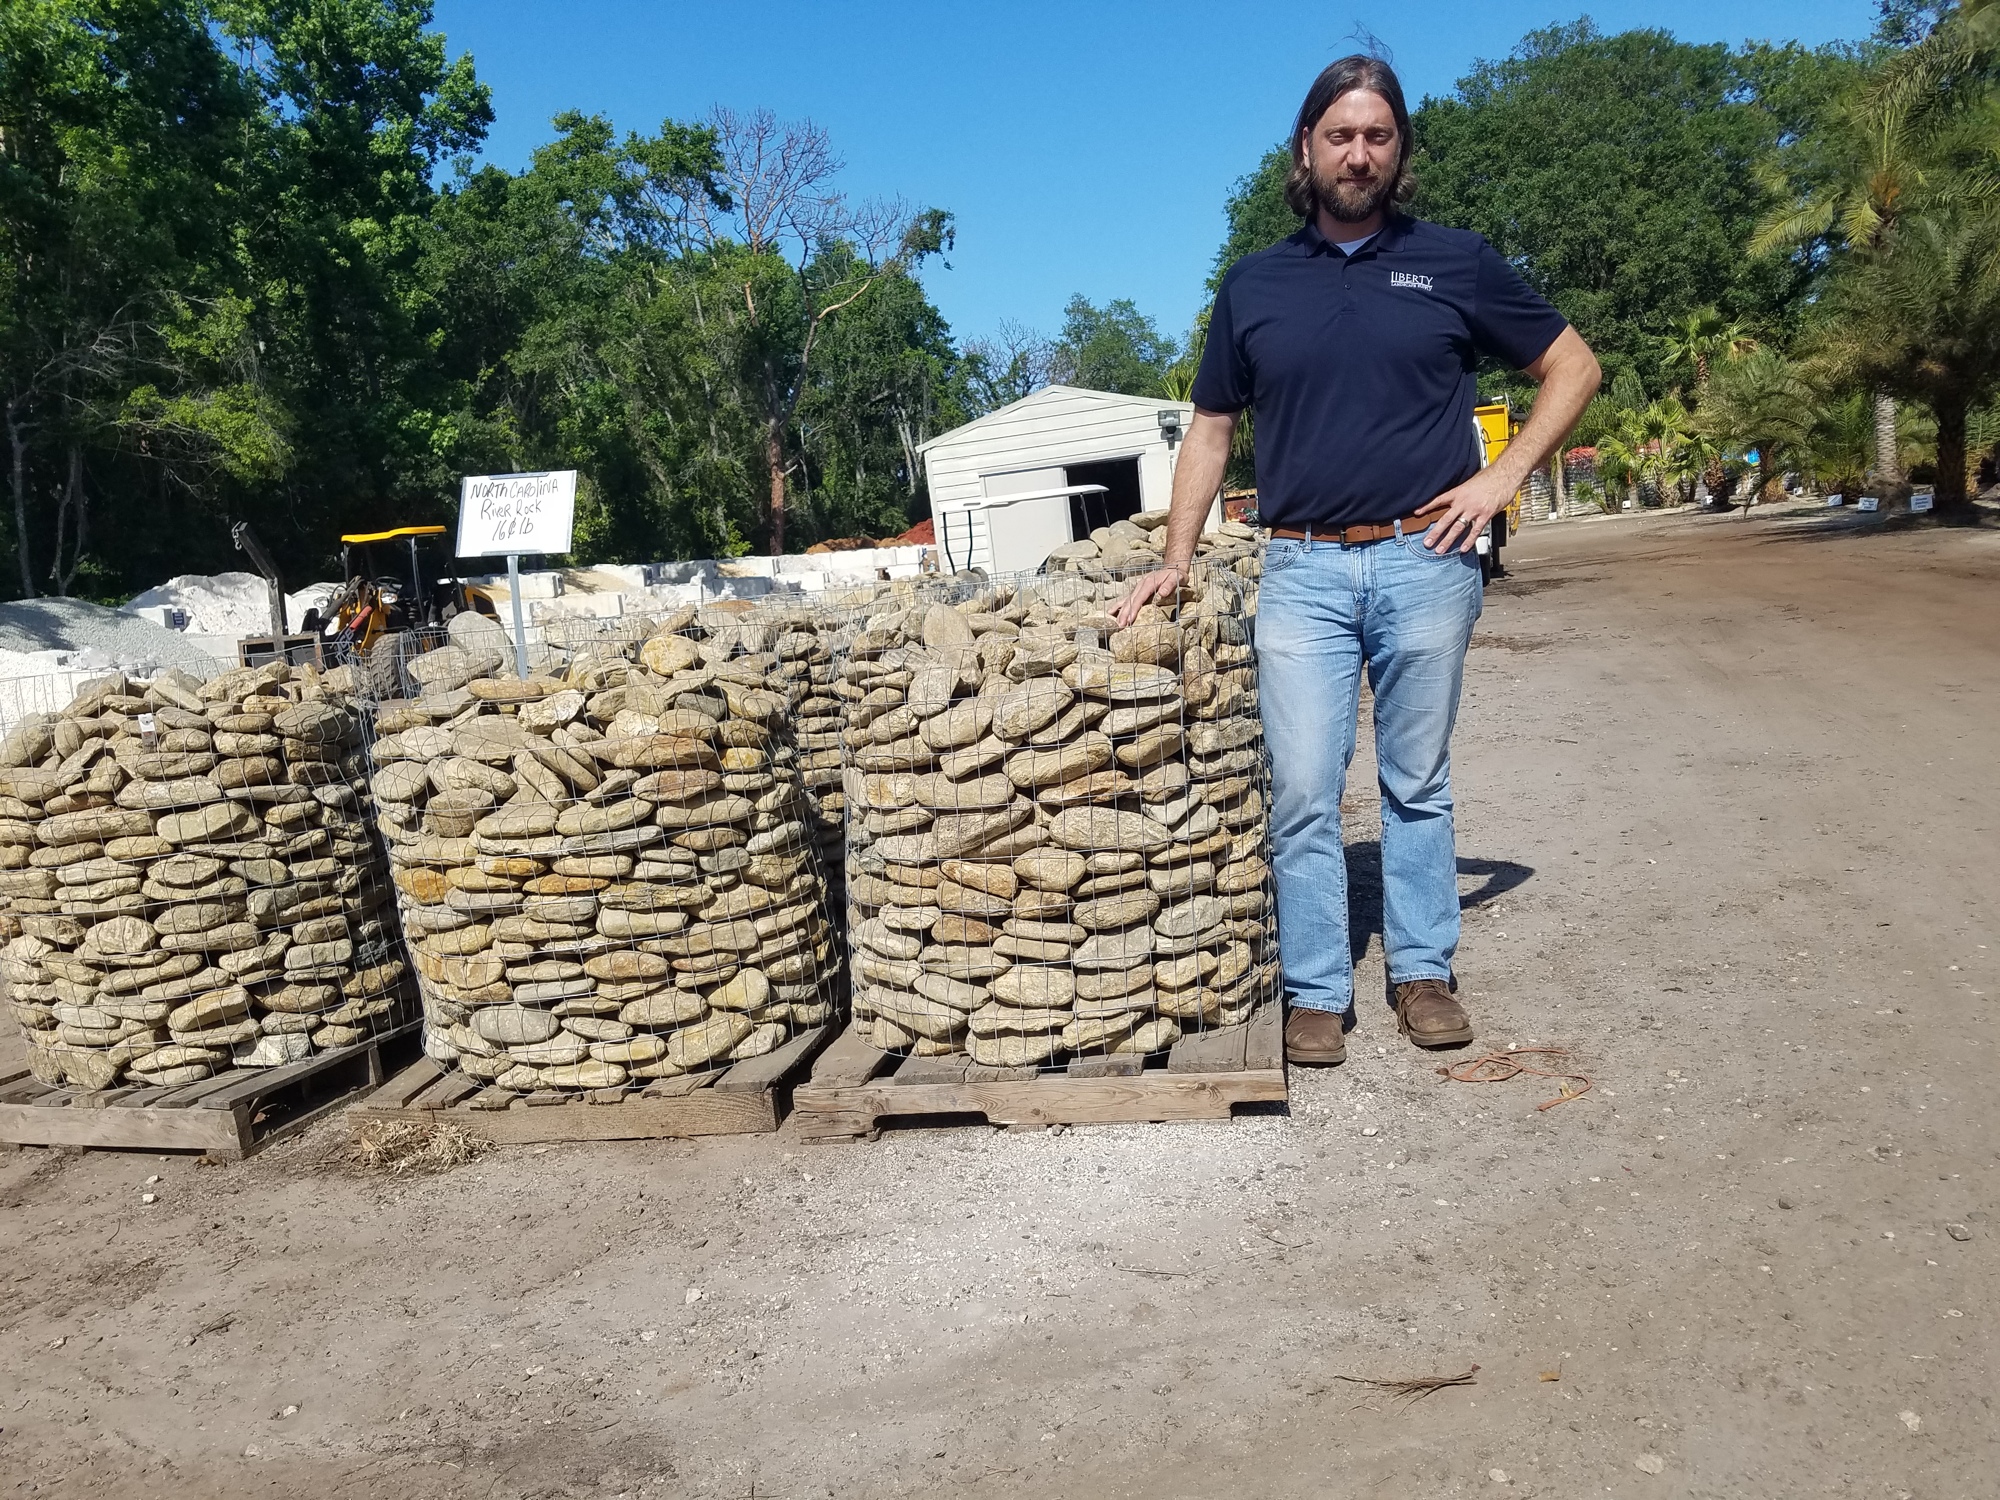 When  Zaffaroni first bought his business, it sold only mulch and stone.